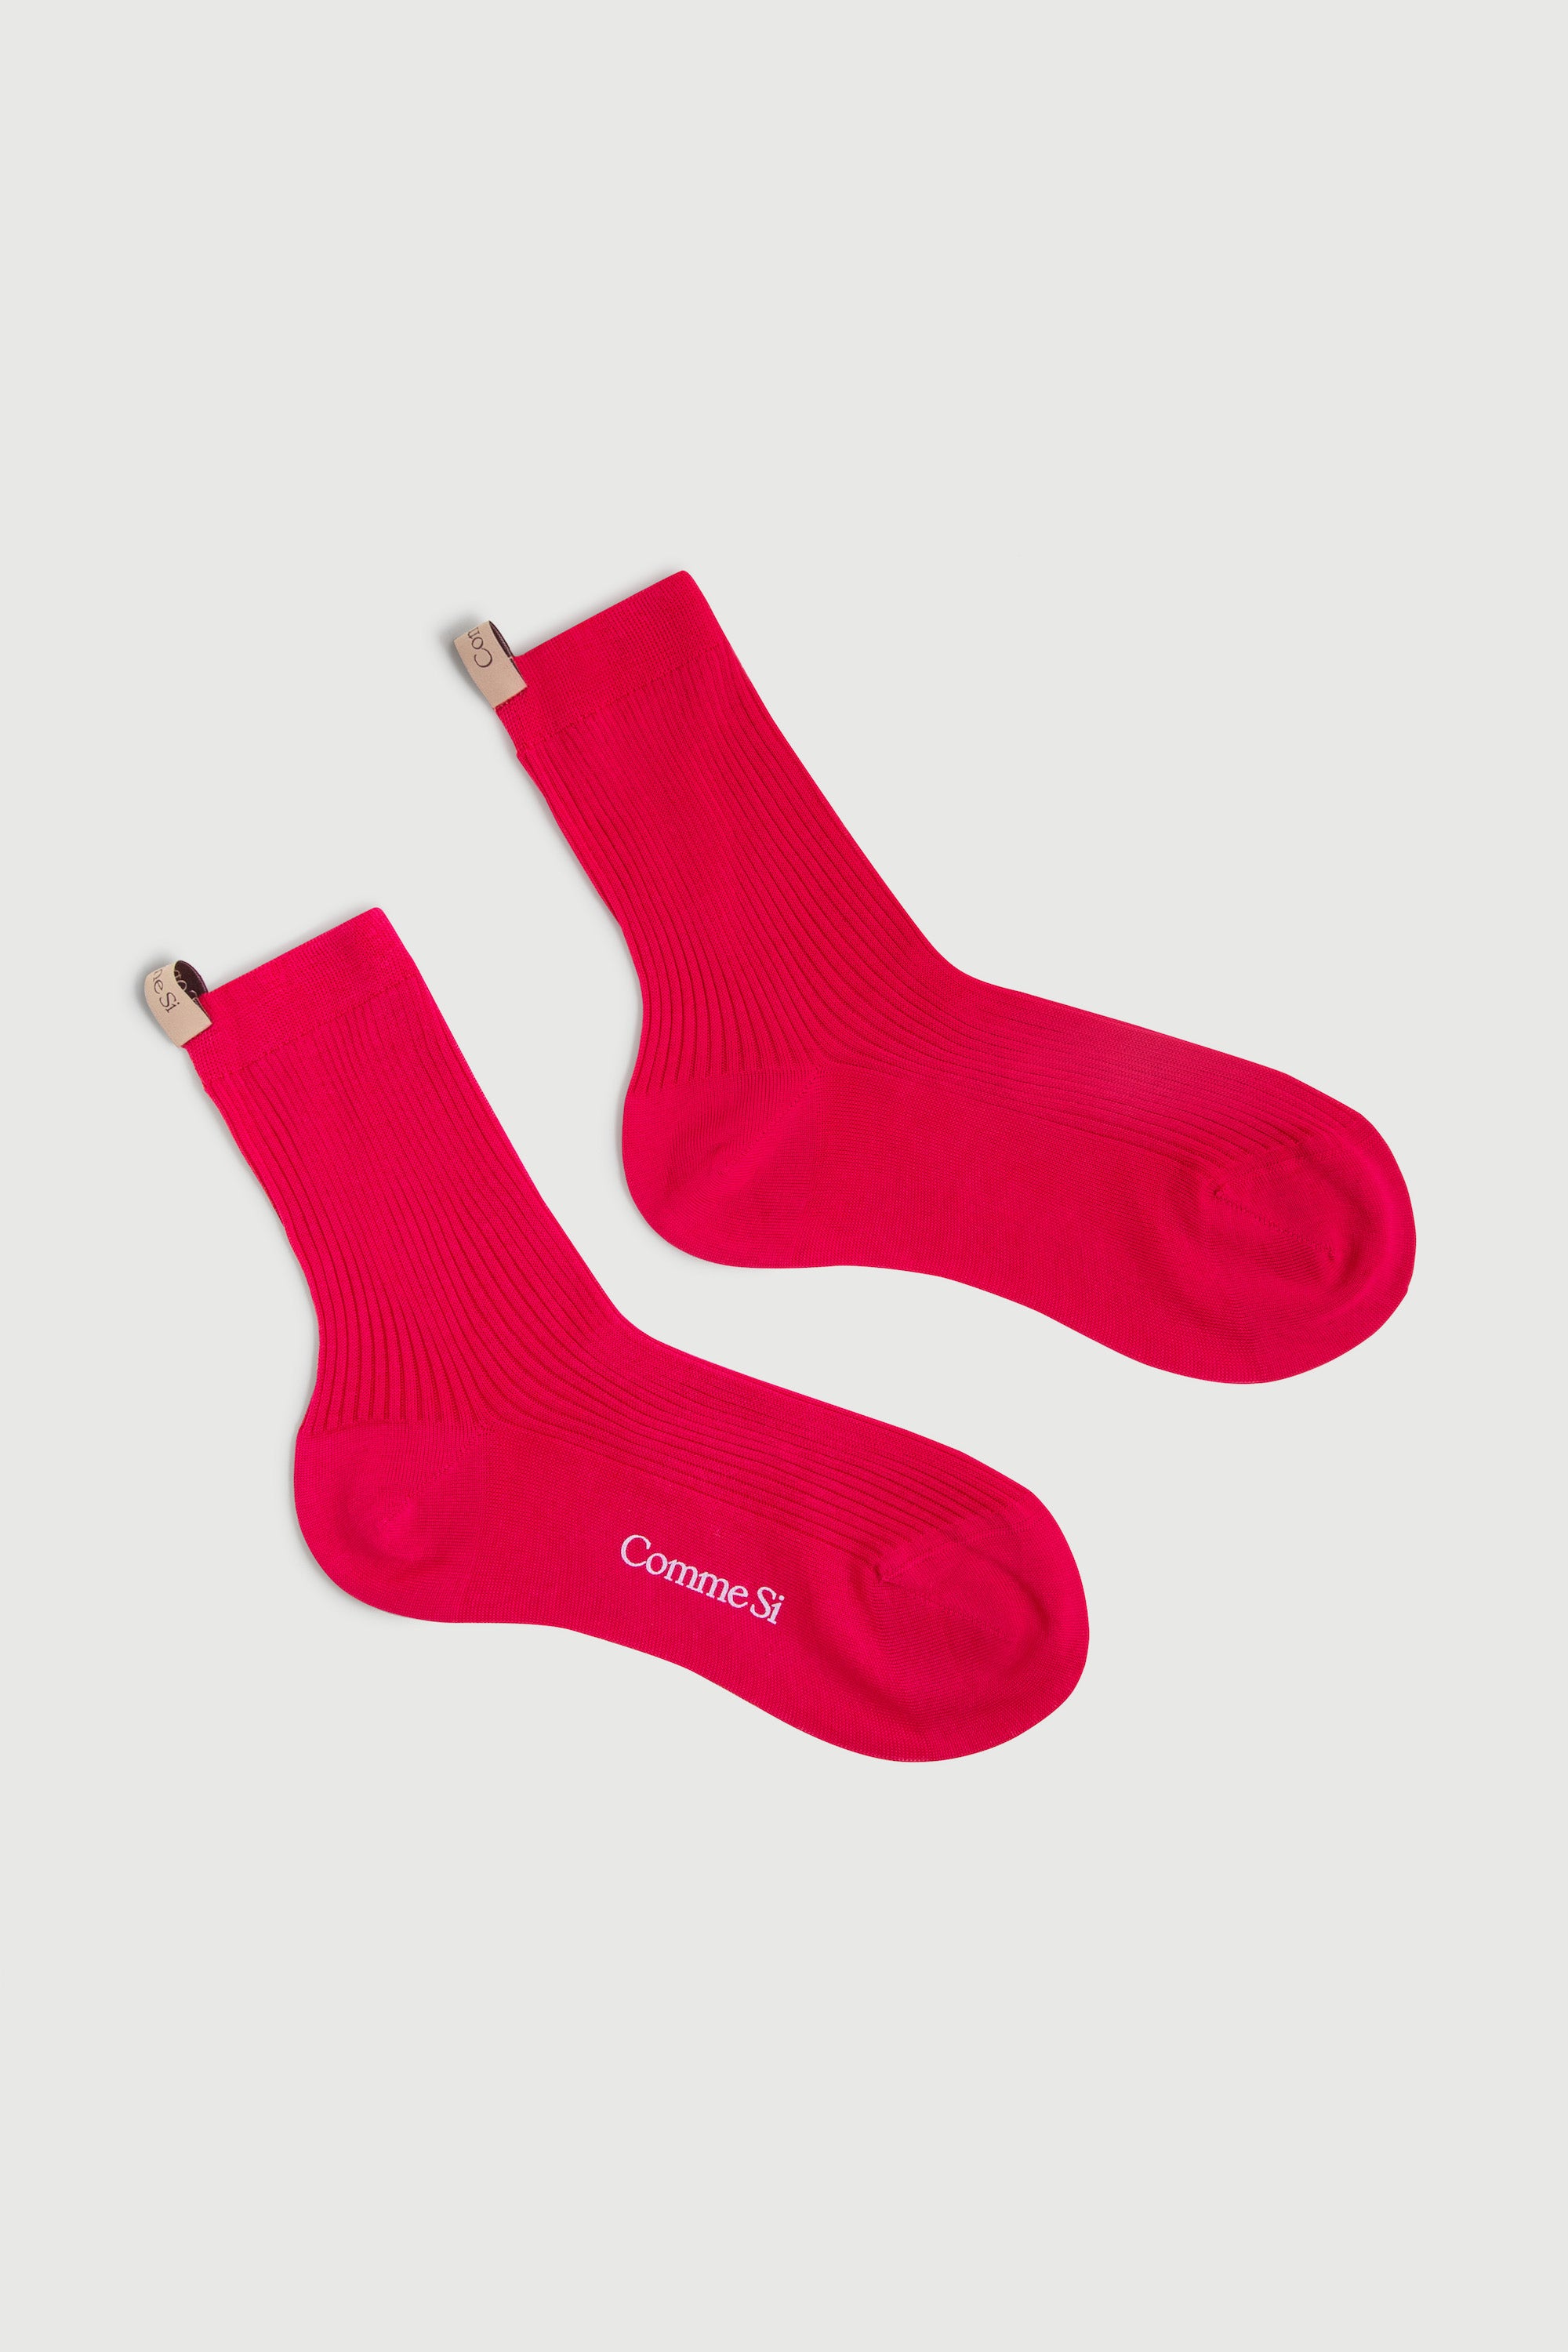 The Agnelli Sock in Hibiscus, Egyptian Cotton